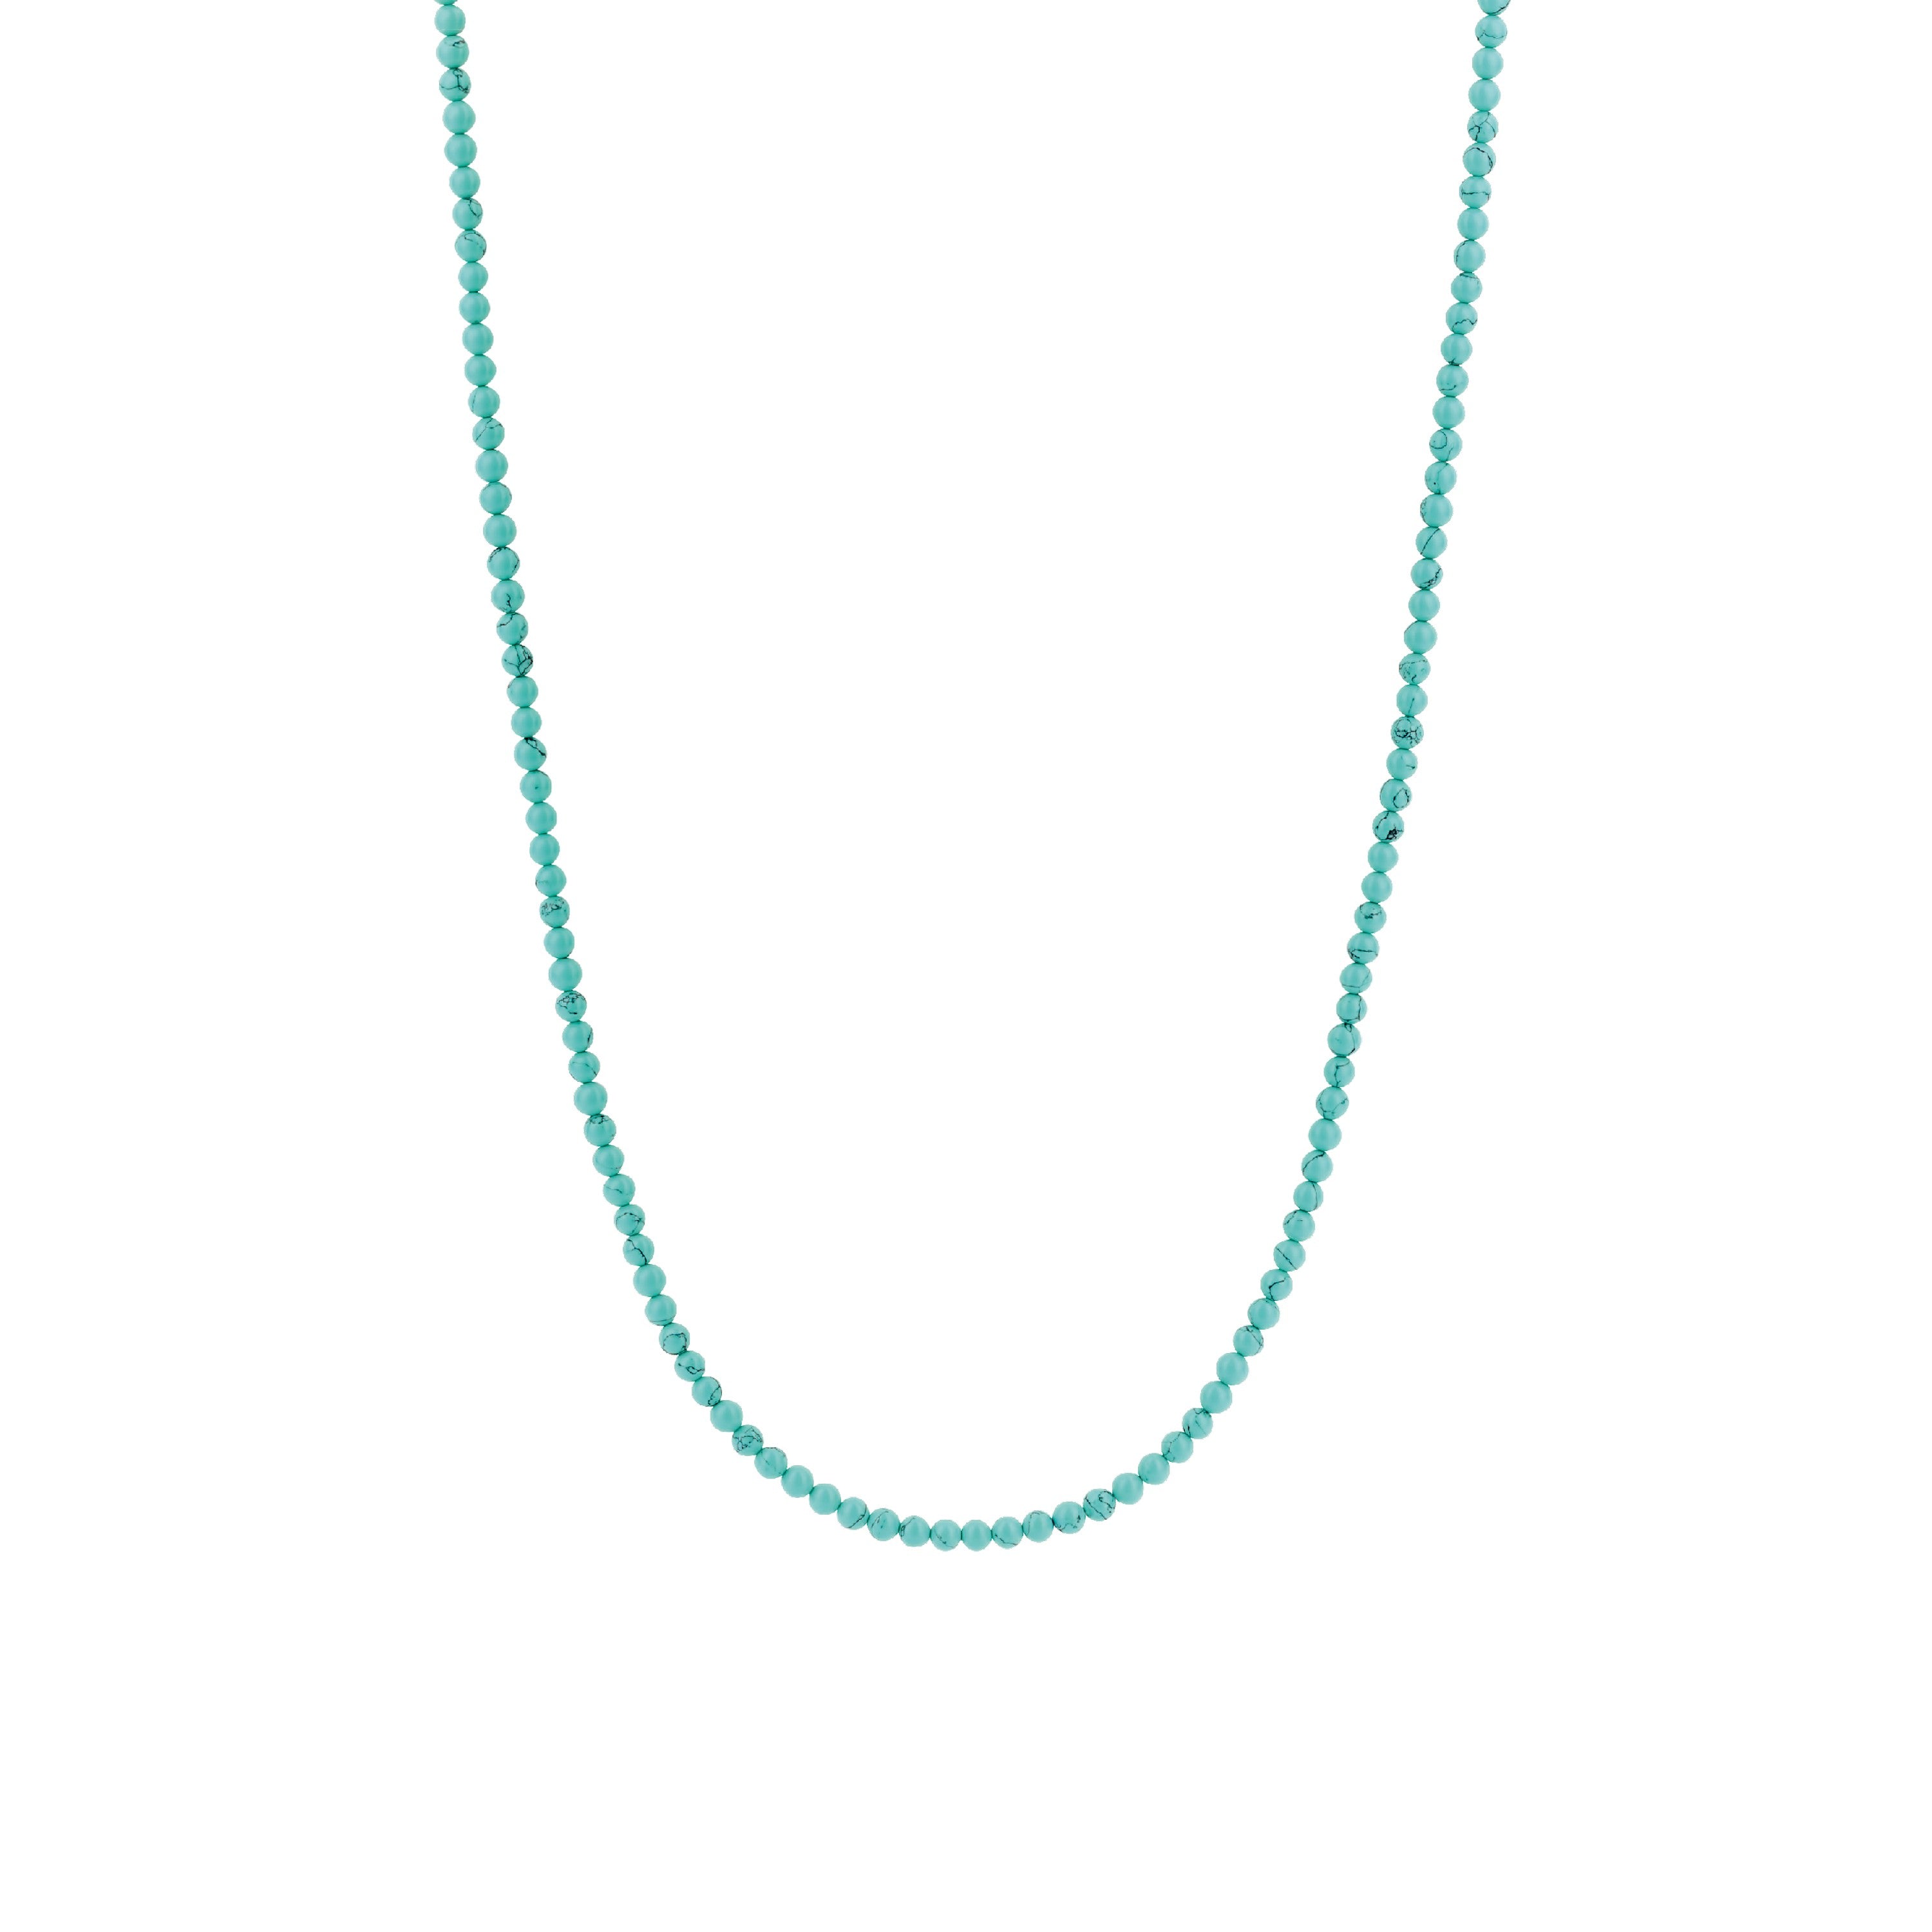 Turquoise Beads Necklace Long